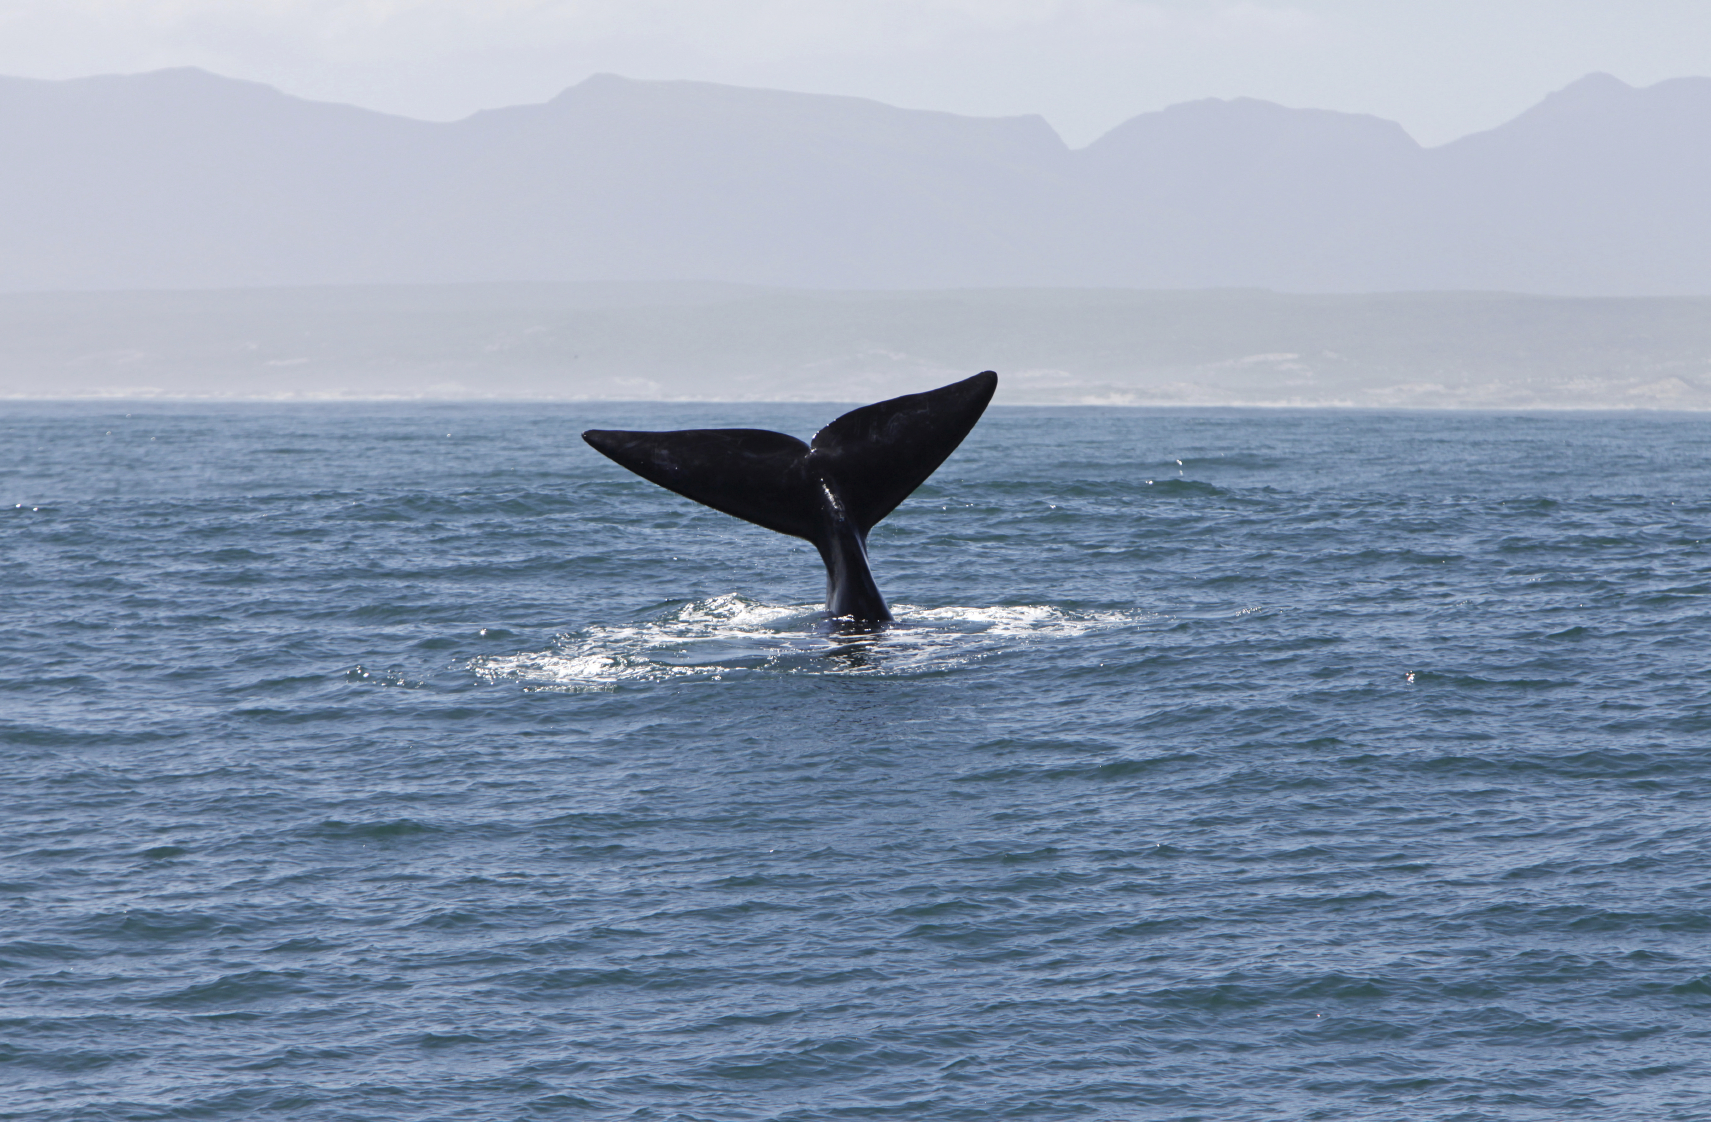 Whale fin visible above the water in South Africa's waters